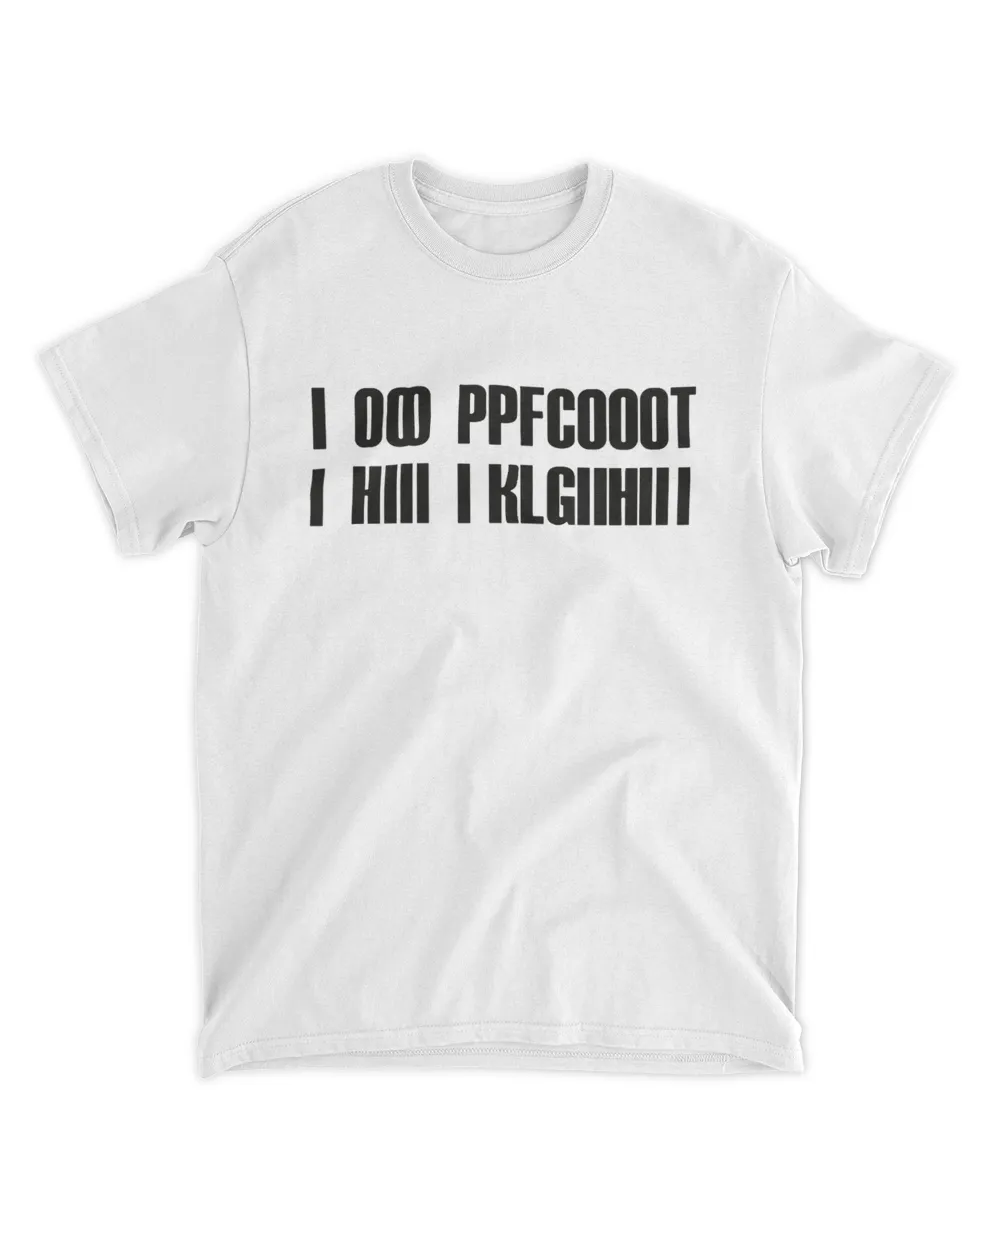 Surprise T-Shirt with Secret Message When Folded Says "I Am Pregnant"